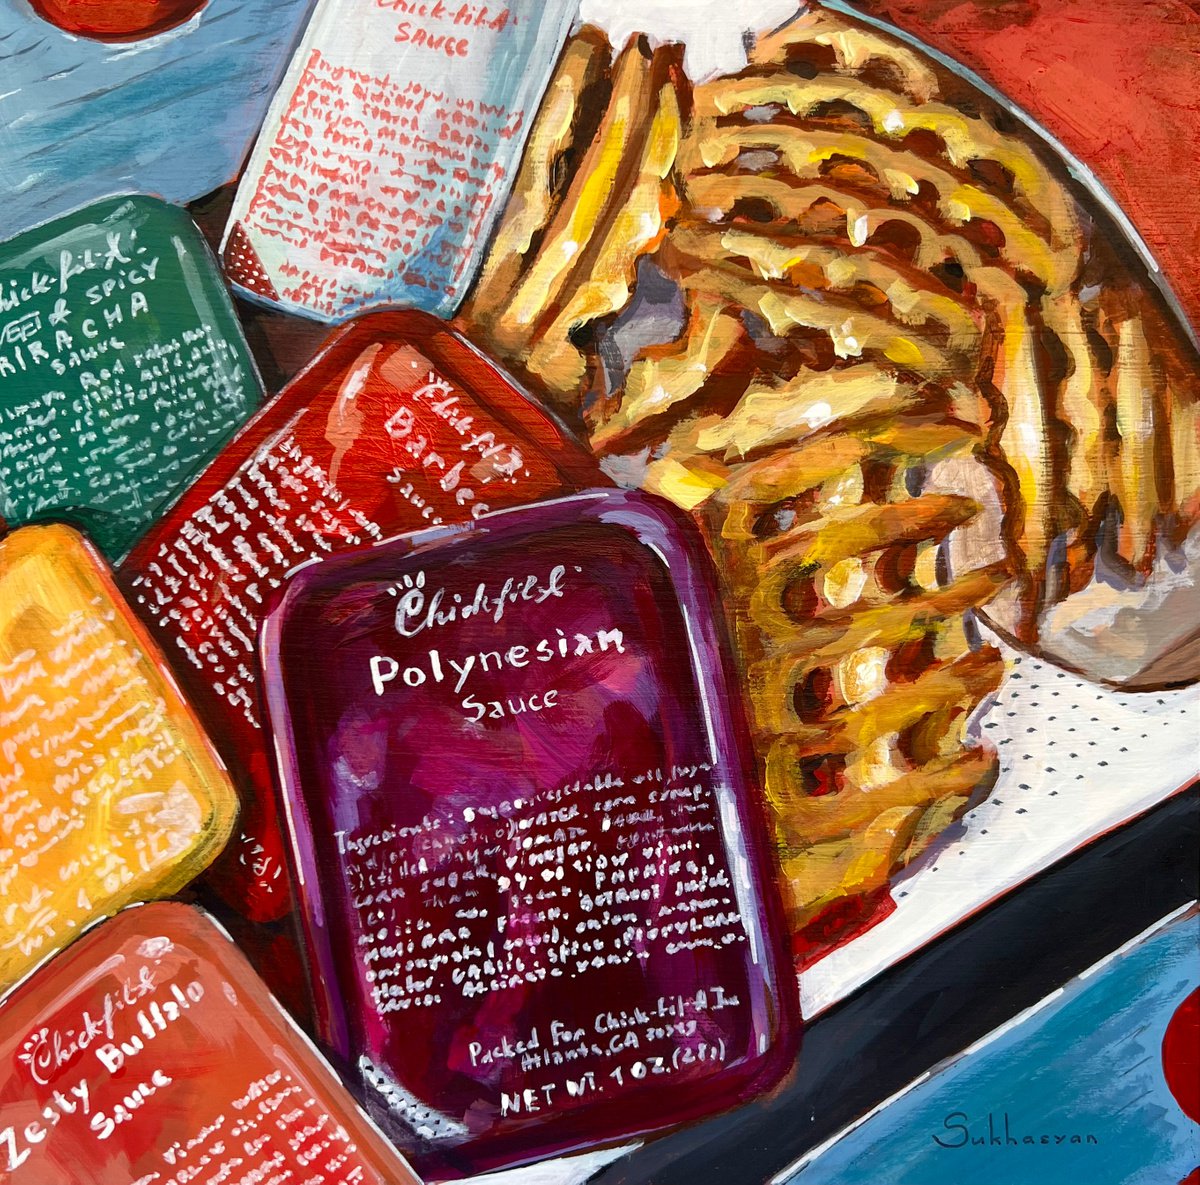 Still Life with Chick-Fil-A French Fries and Sauces by Victoria Sukhasyan